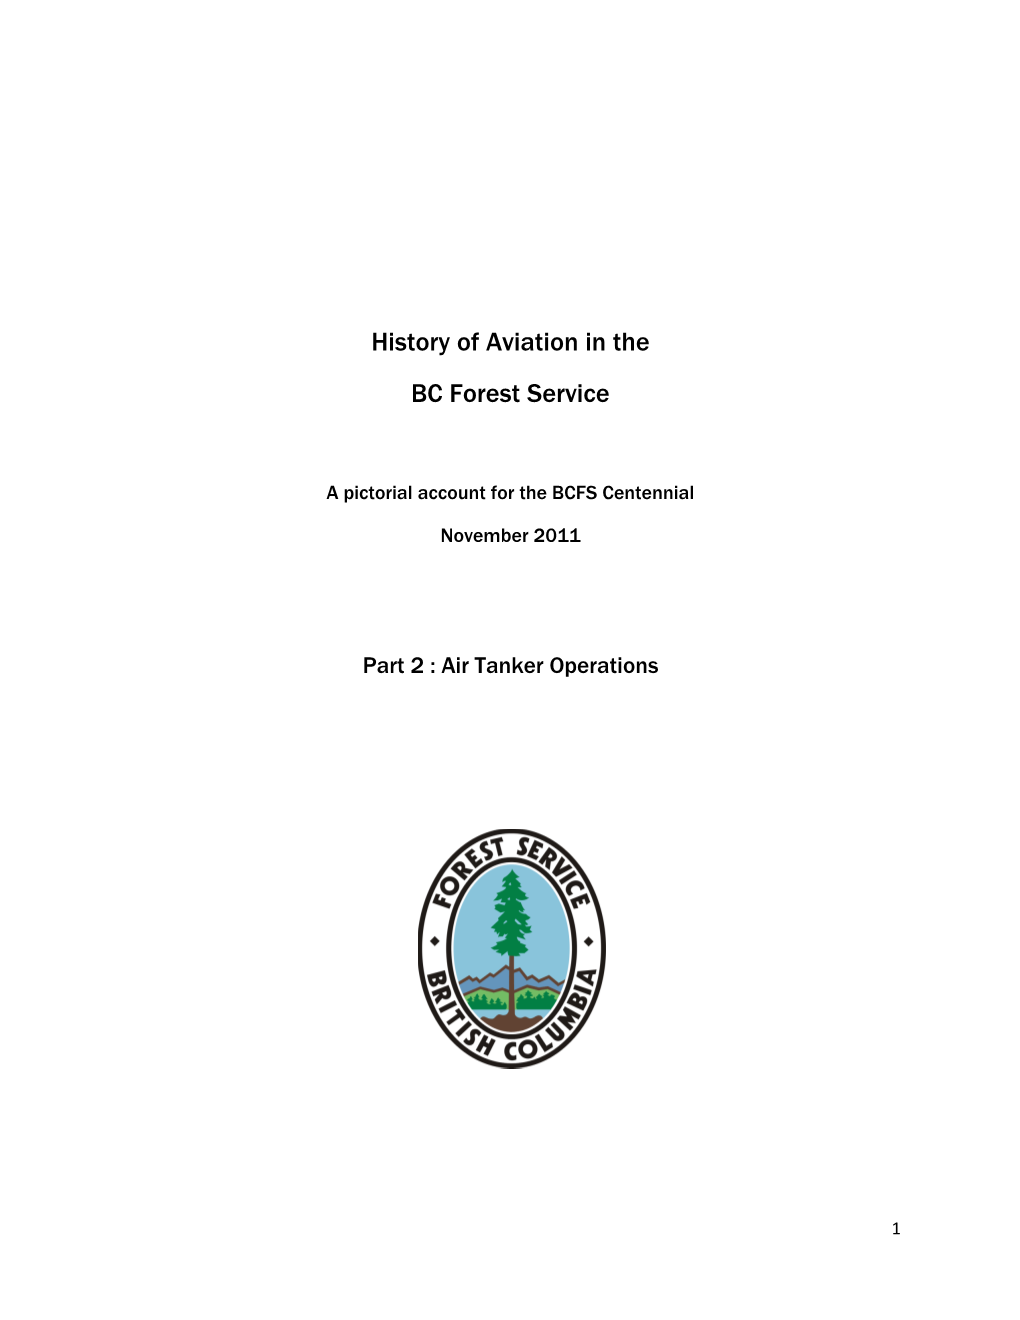 History of Aviation in the BC Forest Service